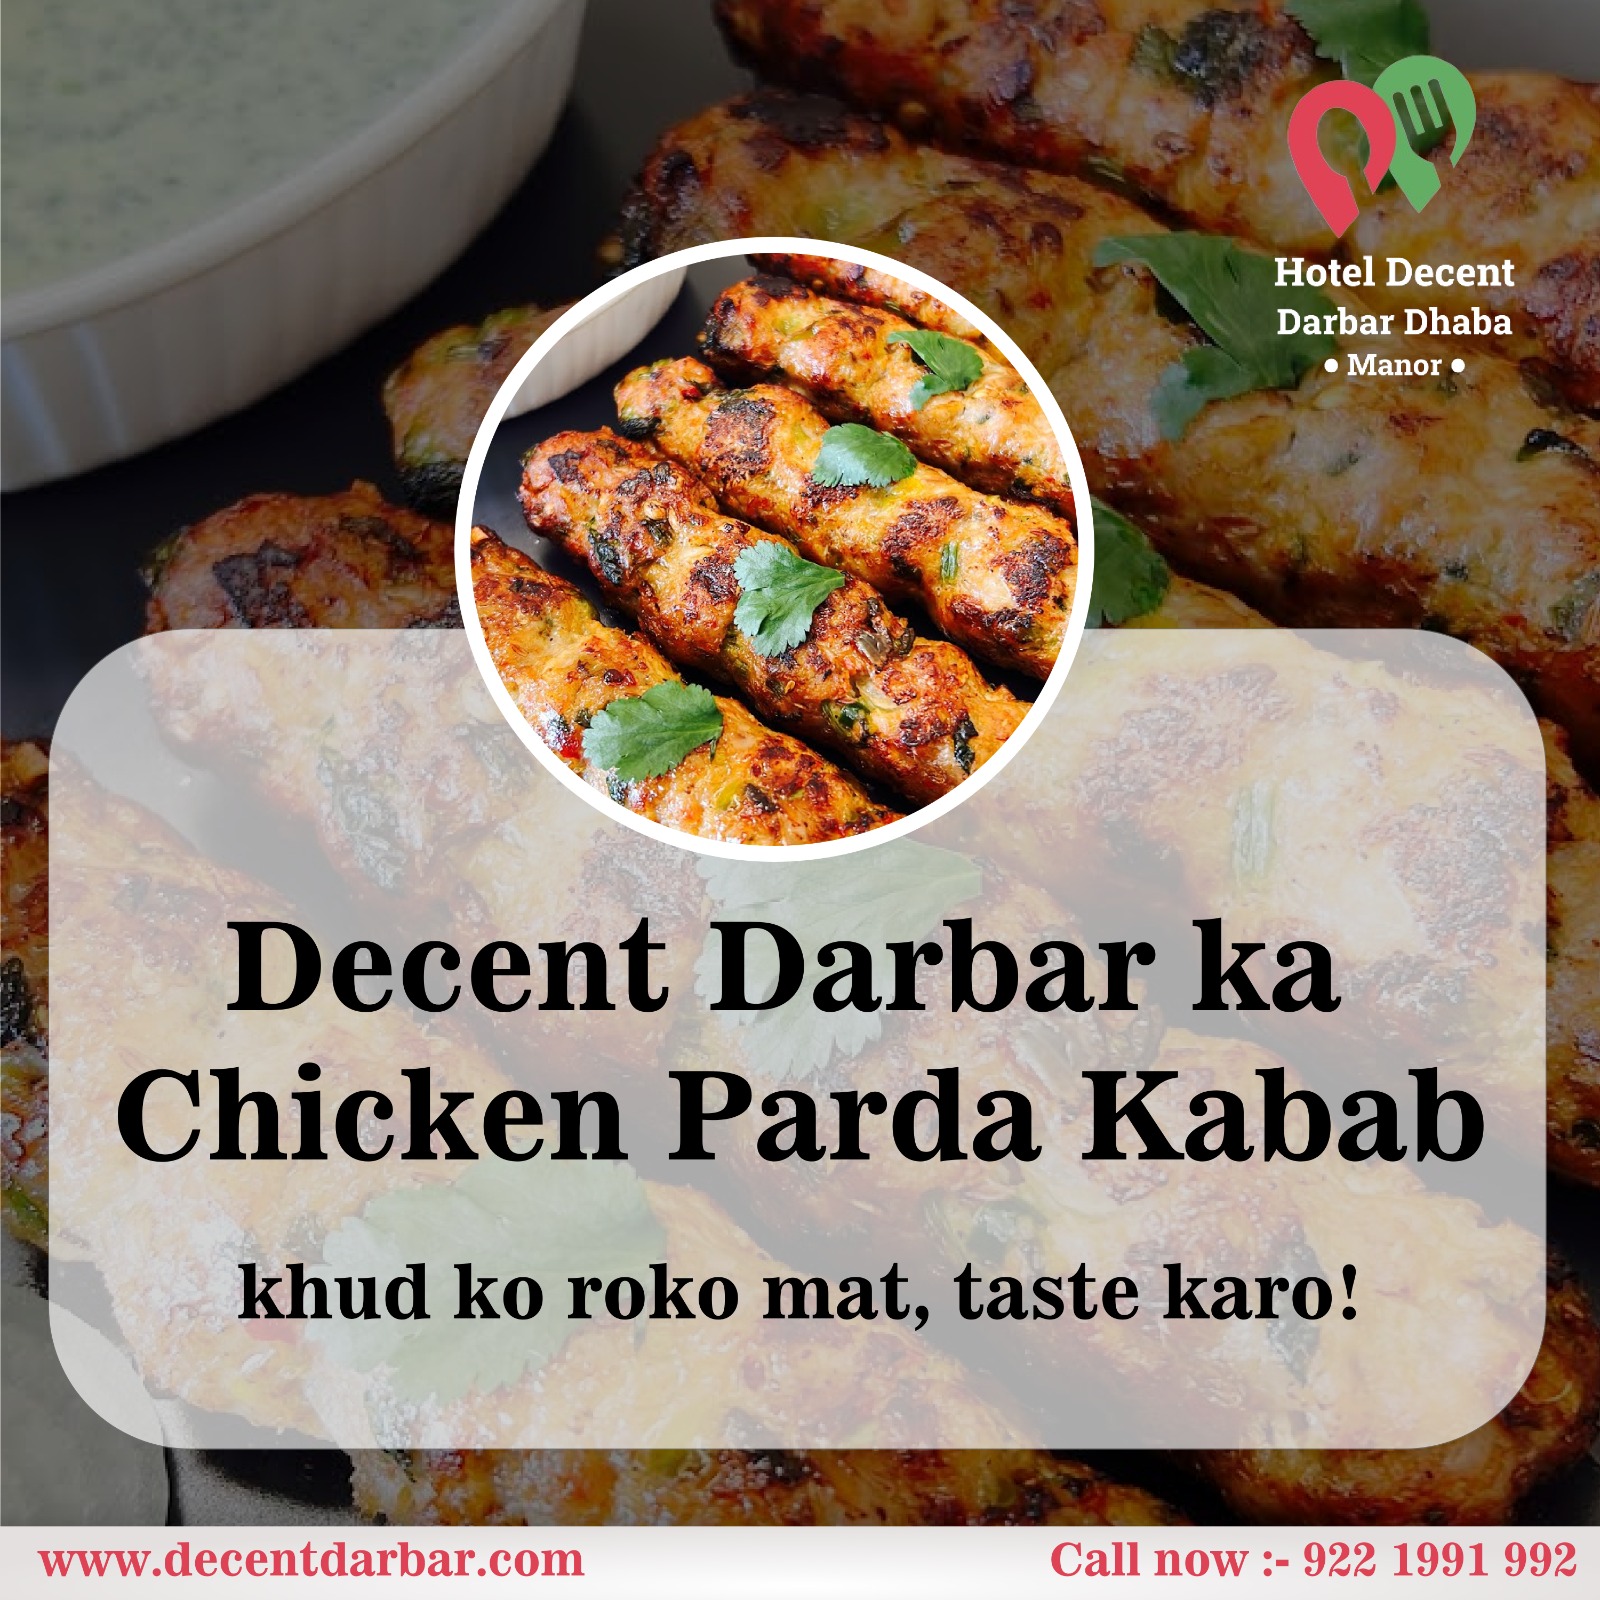 Discover the Taste of Decent Darbar Dhaba